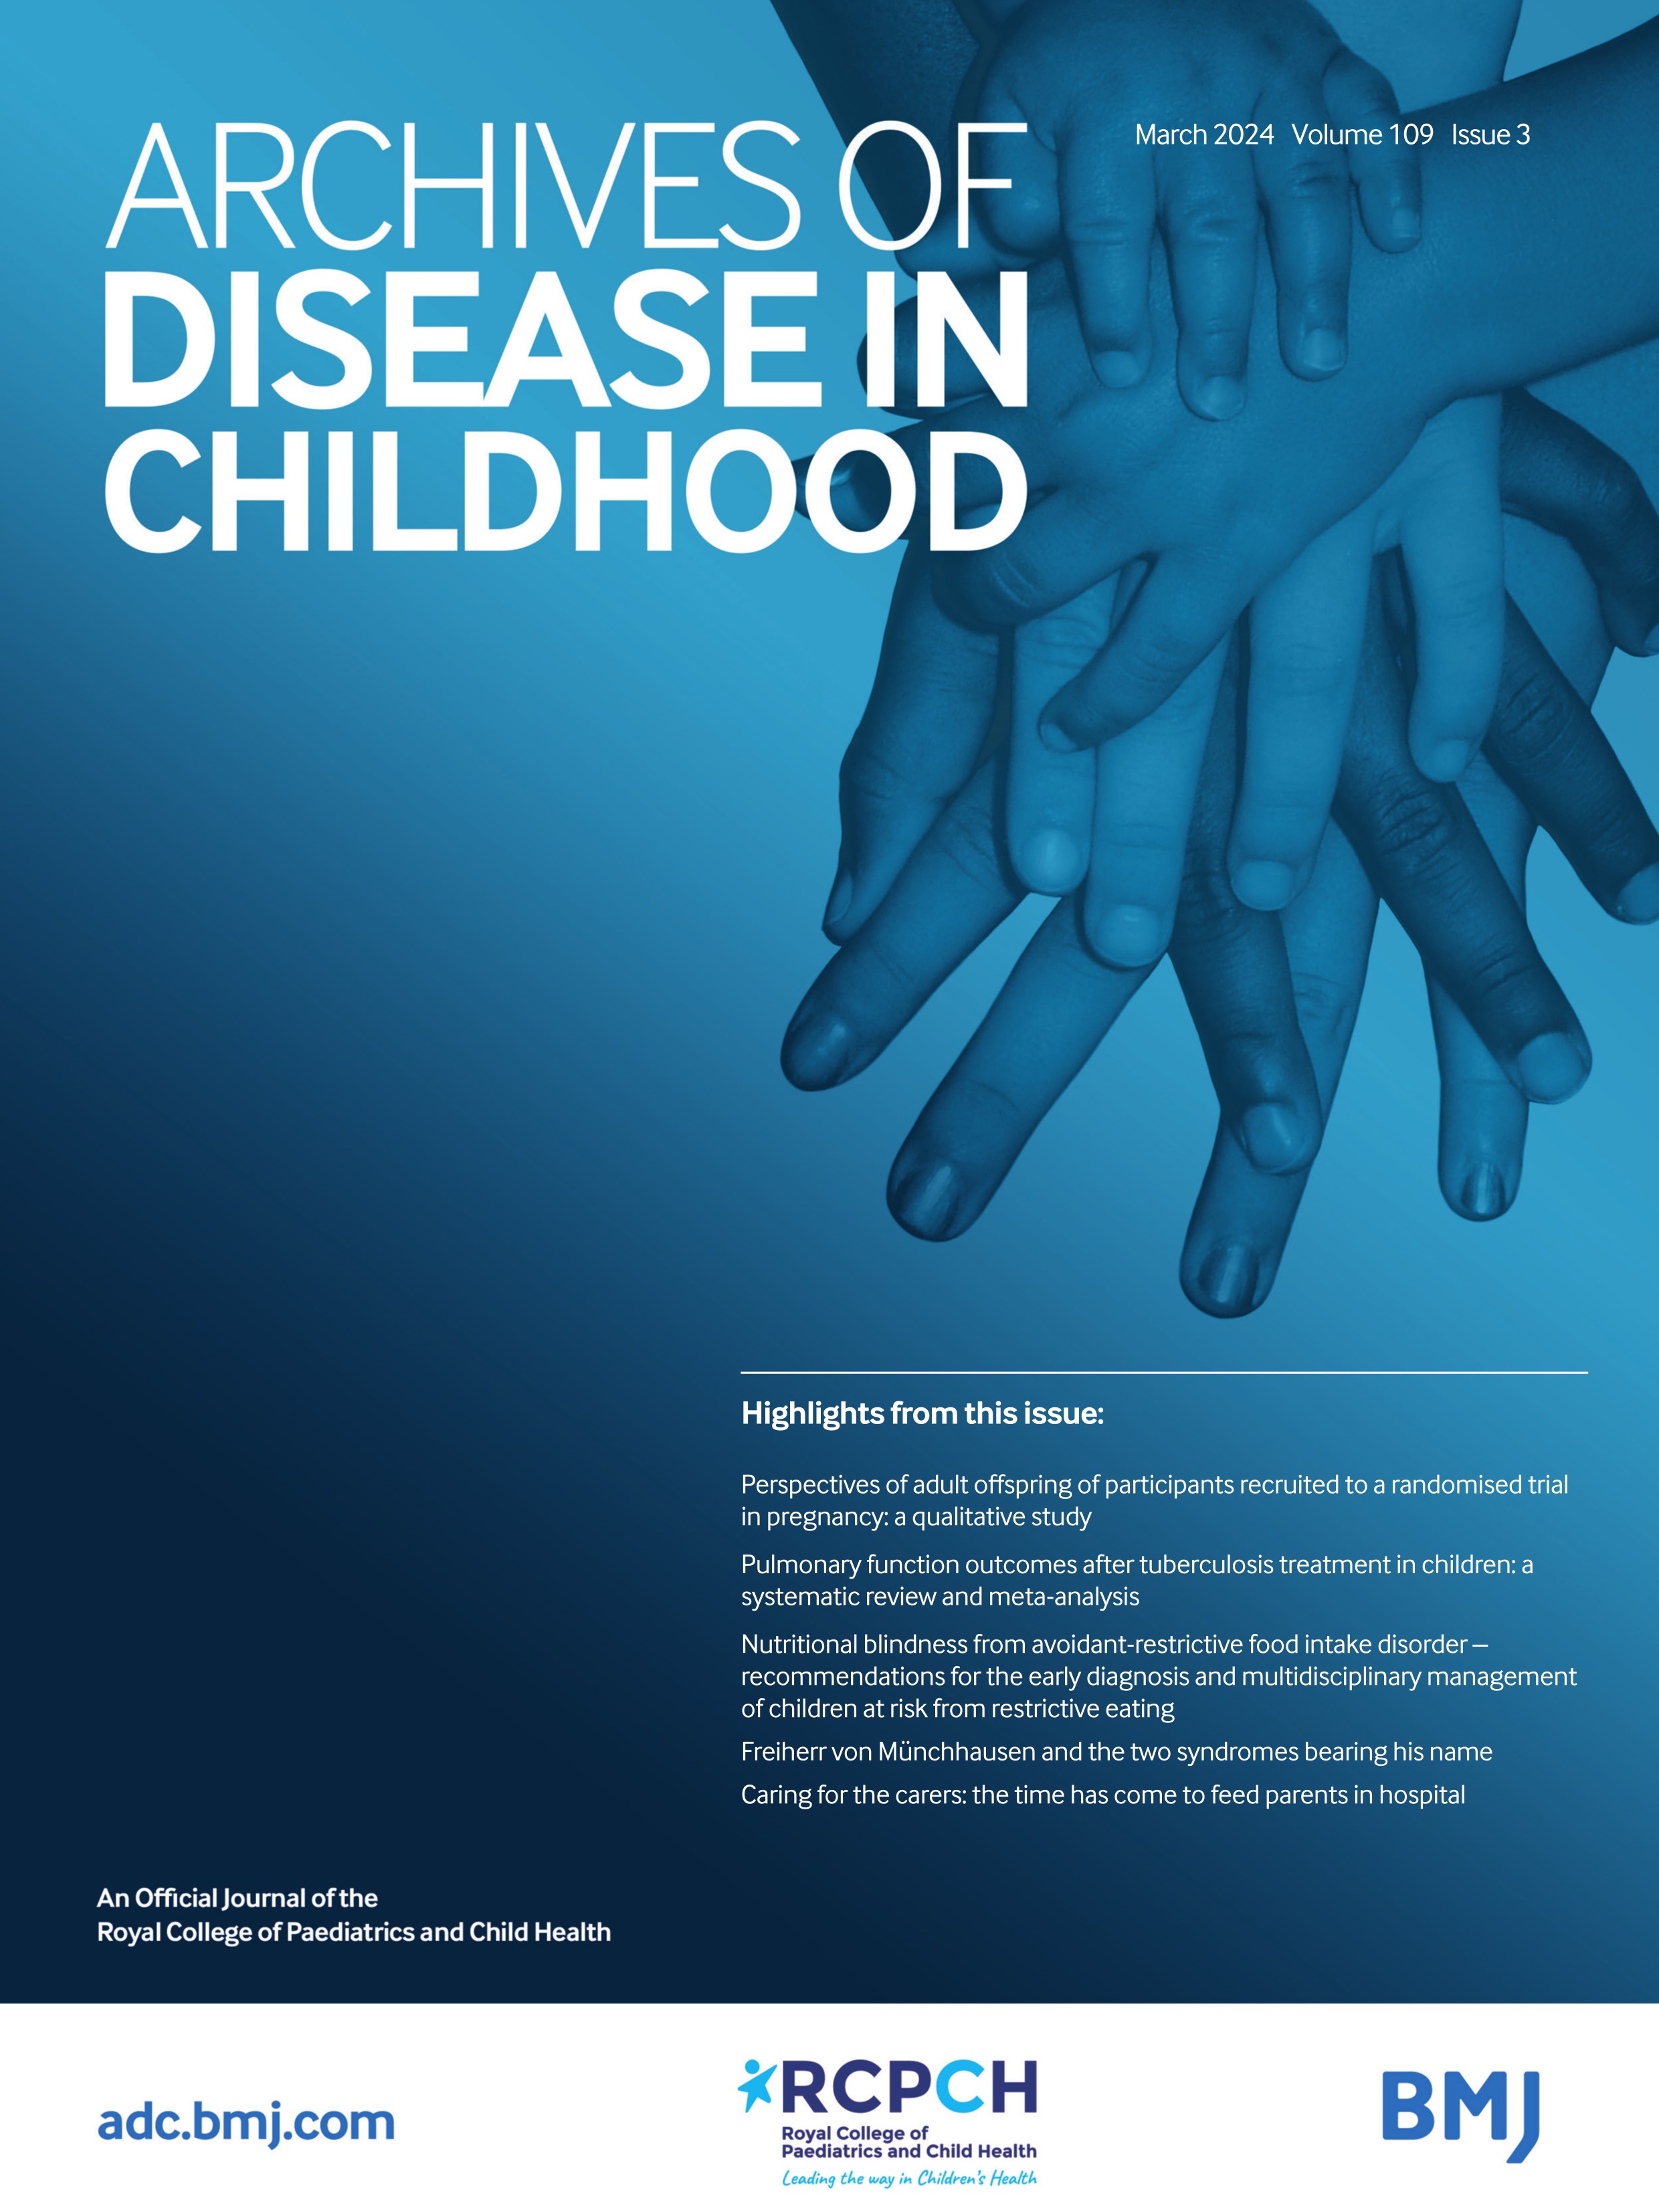 Nutritional blindness from avoidant-restrictive food intake disorder - recommendations for the early diagnosis and multidisciplinary management of children at risk from restrictive eating